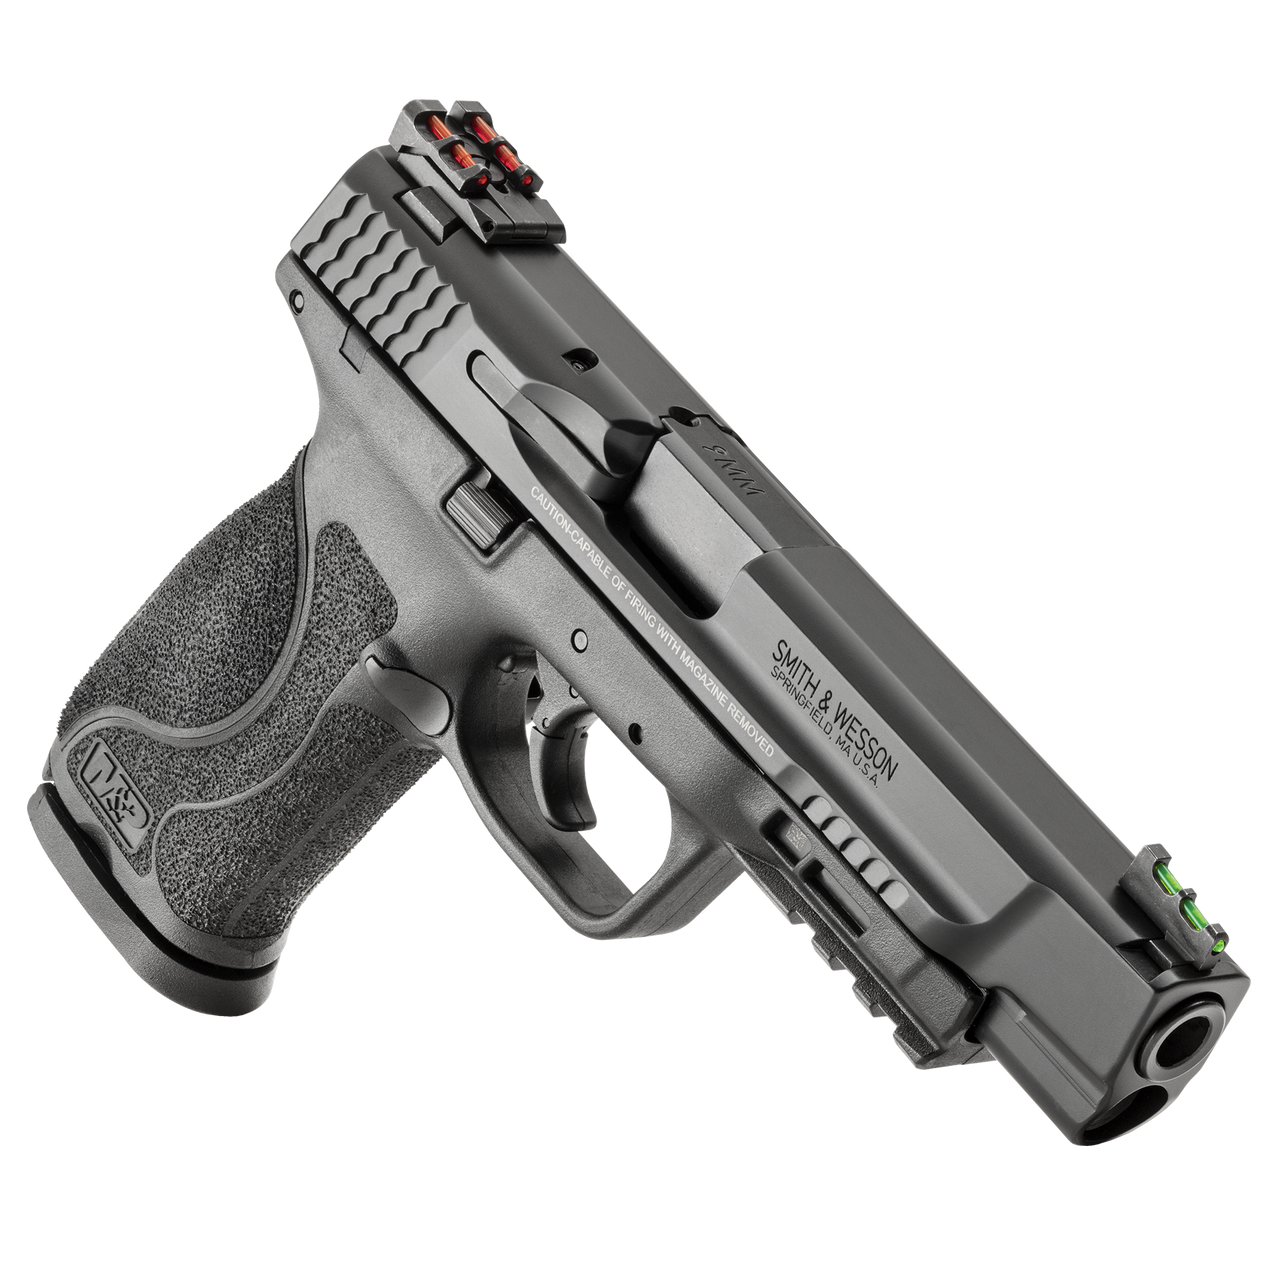 Smith&Wesson M&P9 2.0 Pro series